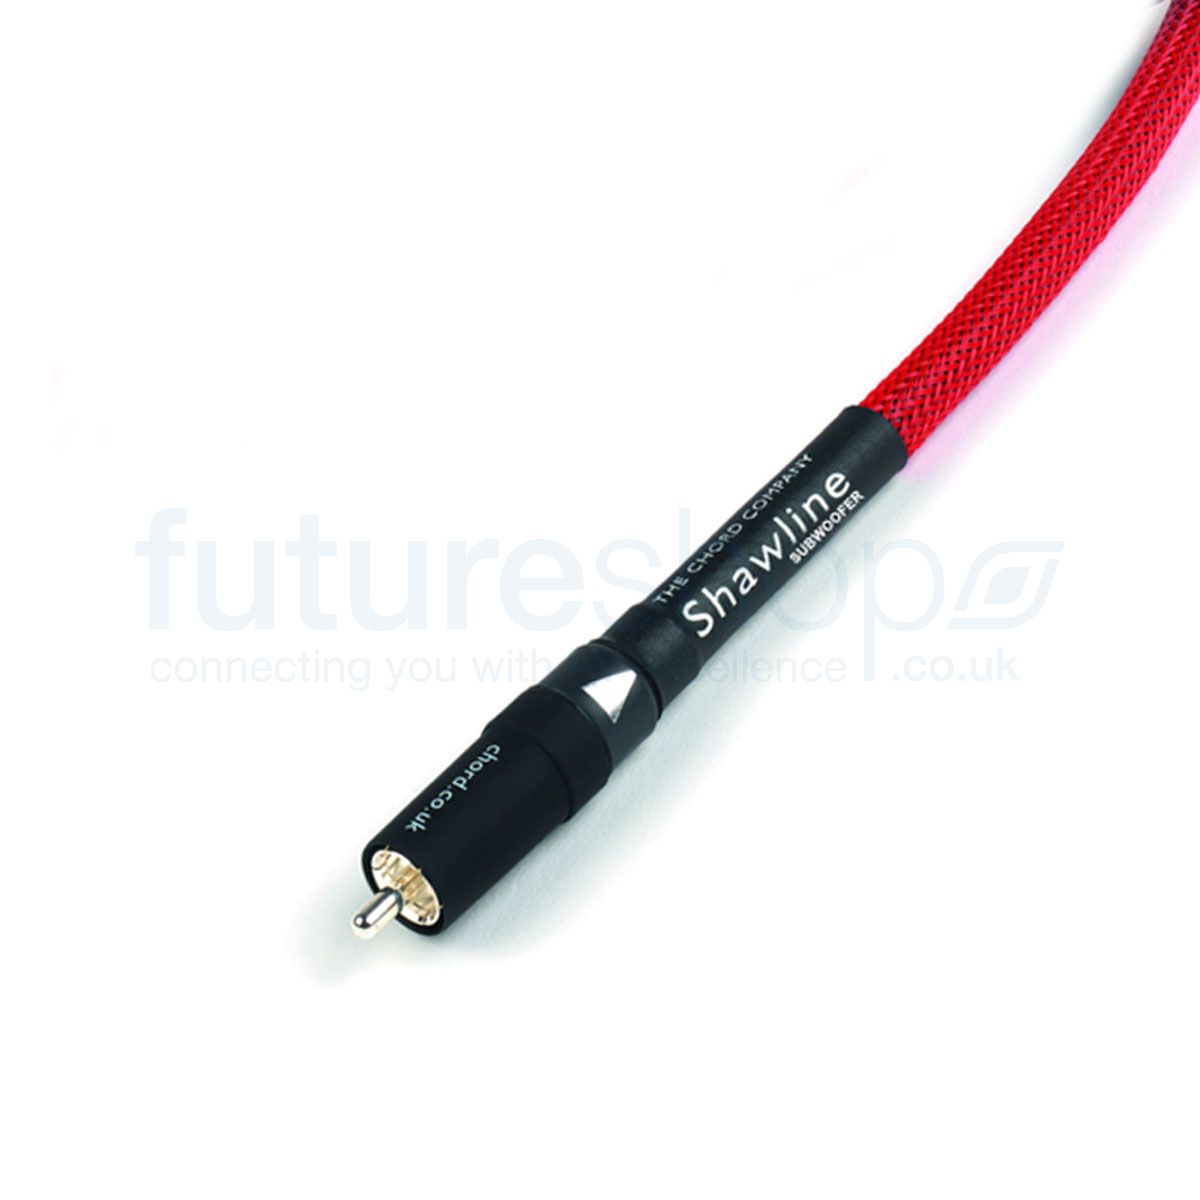 Chord Shawline 1 Rca To 1 Rca Subwoofer Cable Future Shop